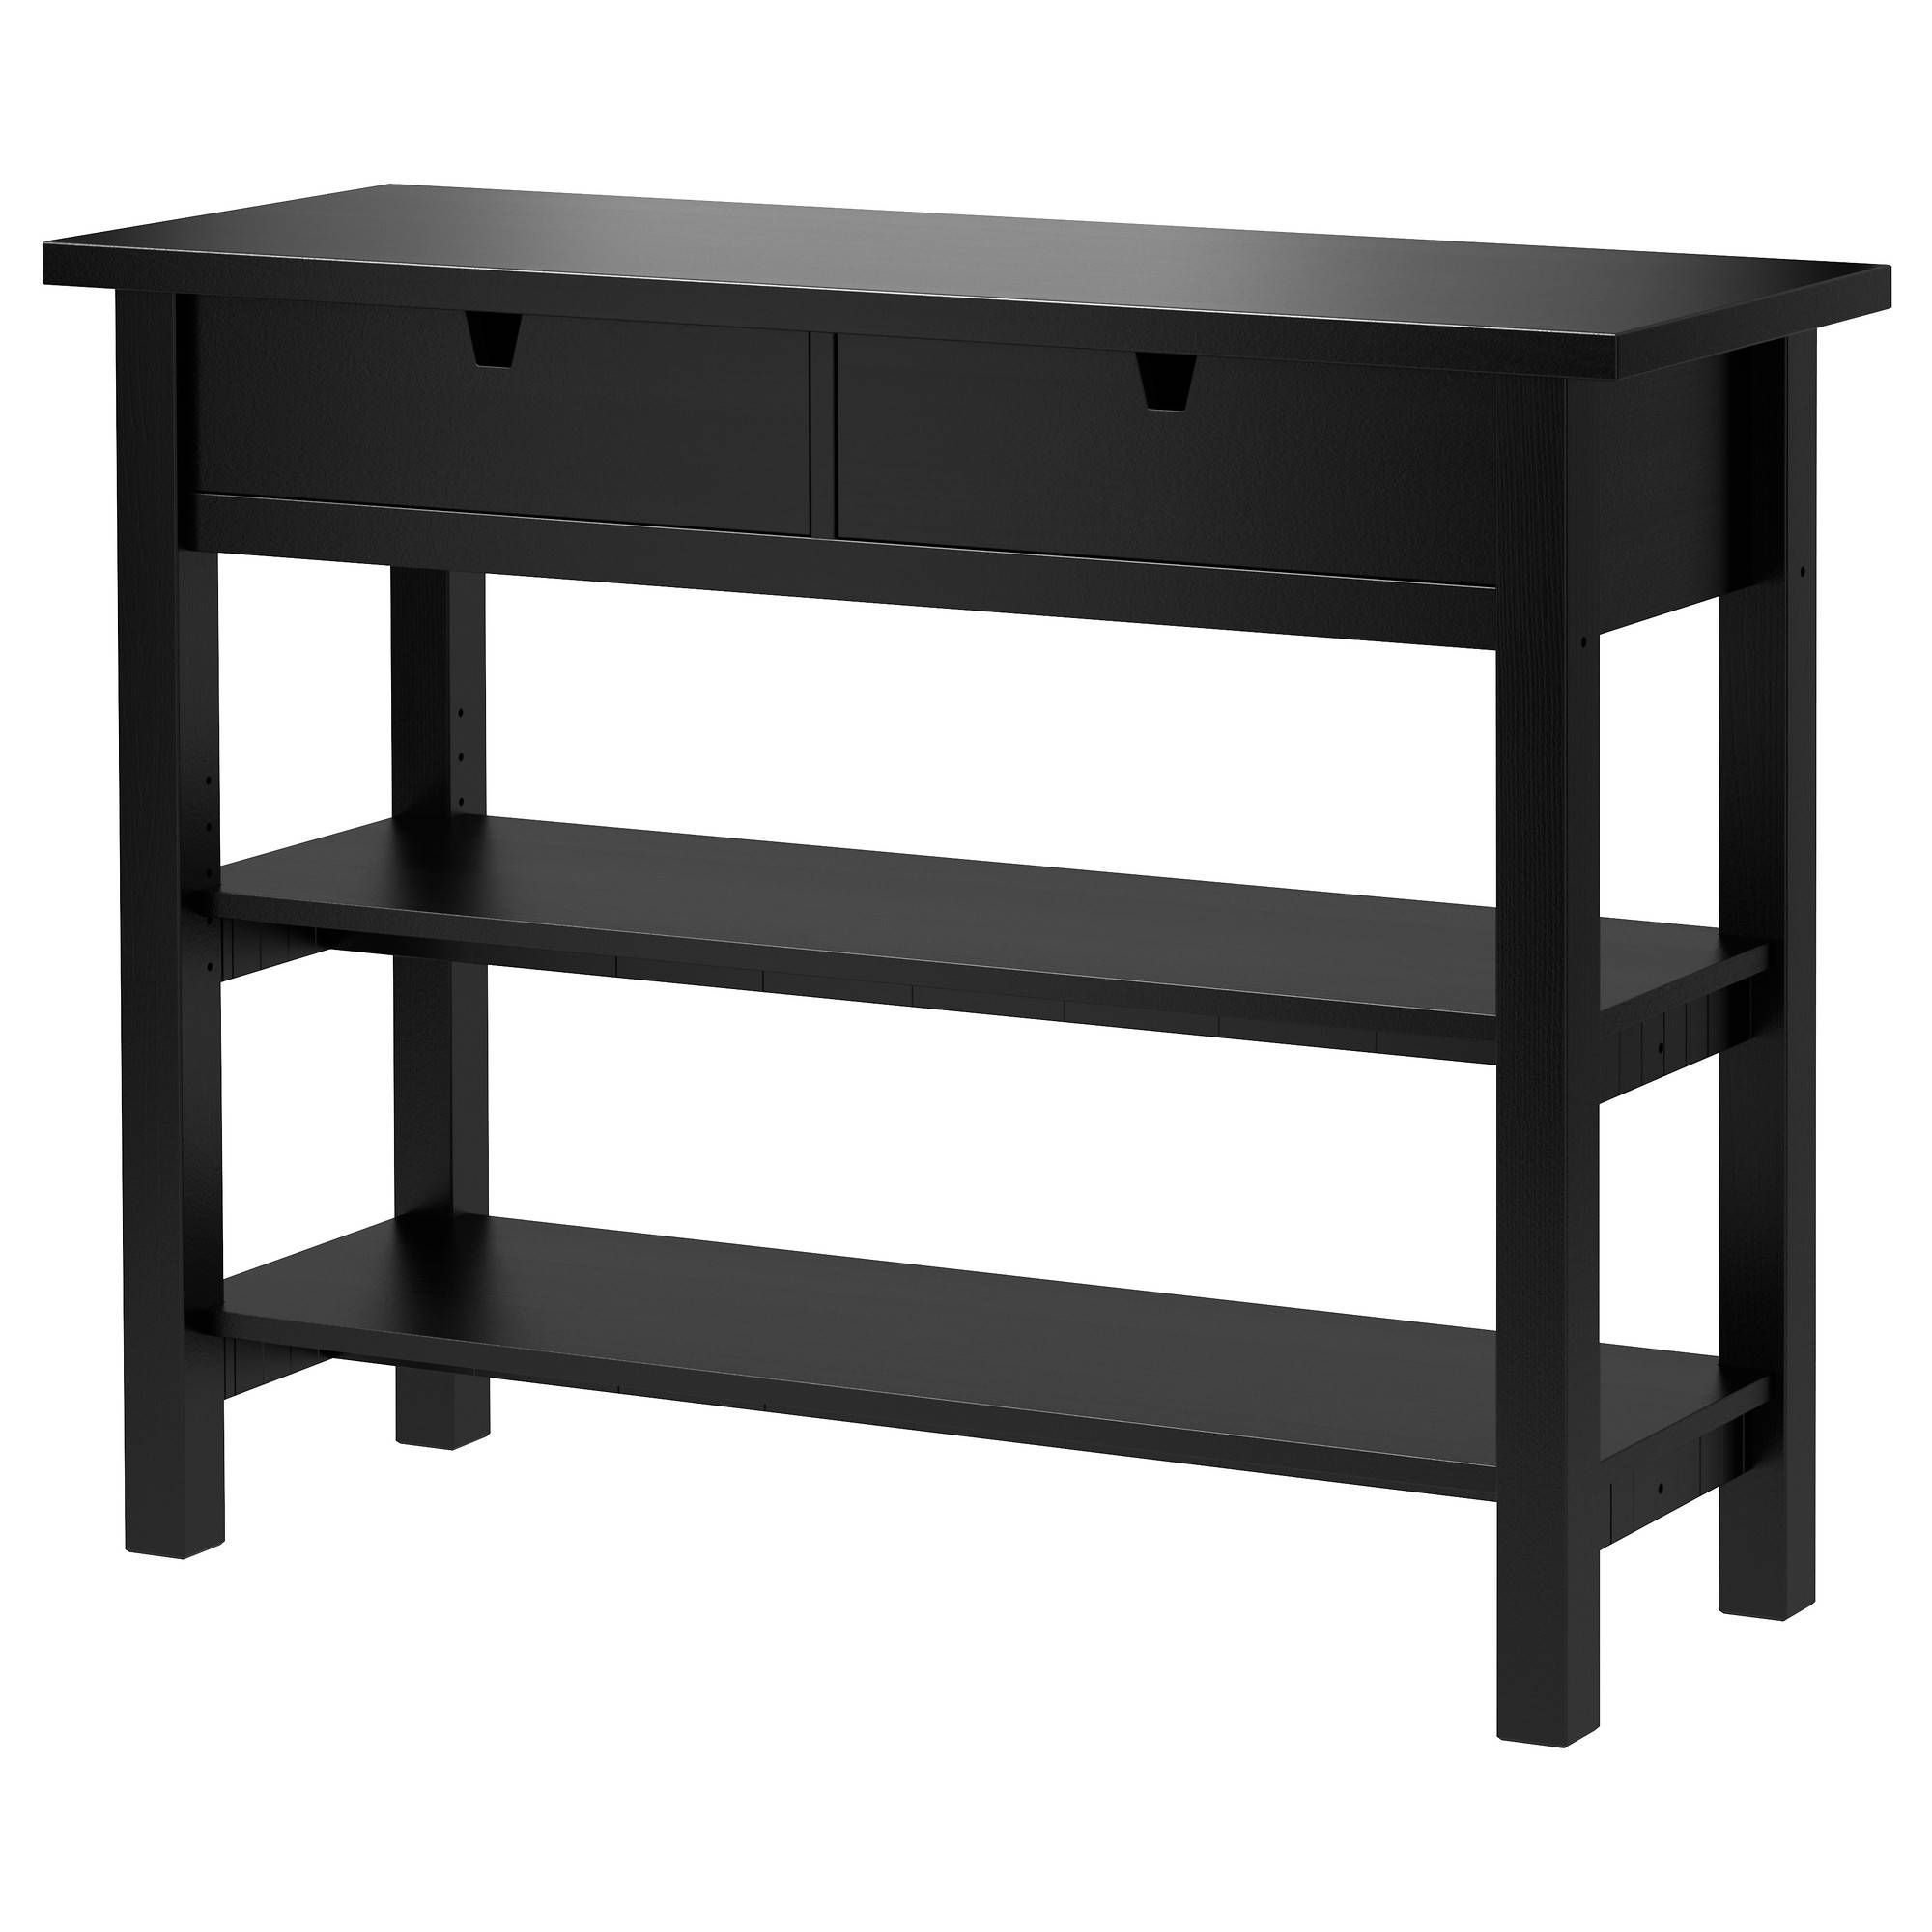 Norden Sideboard – Ikea For Black Sideboard Cabinets (View 6 of 15)